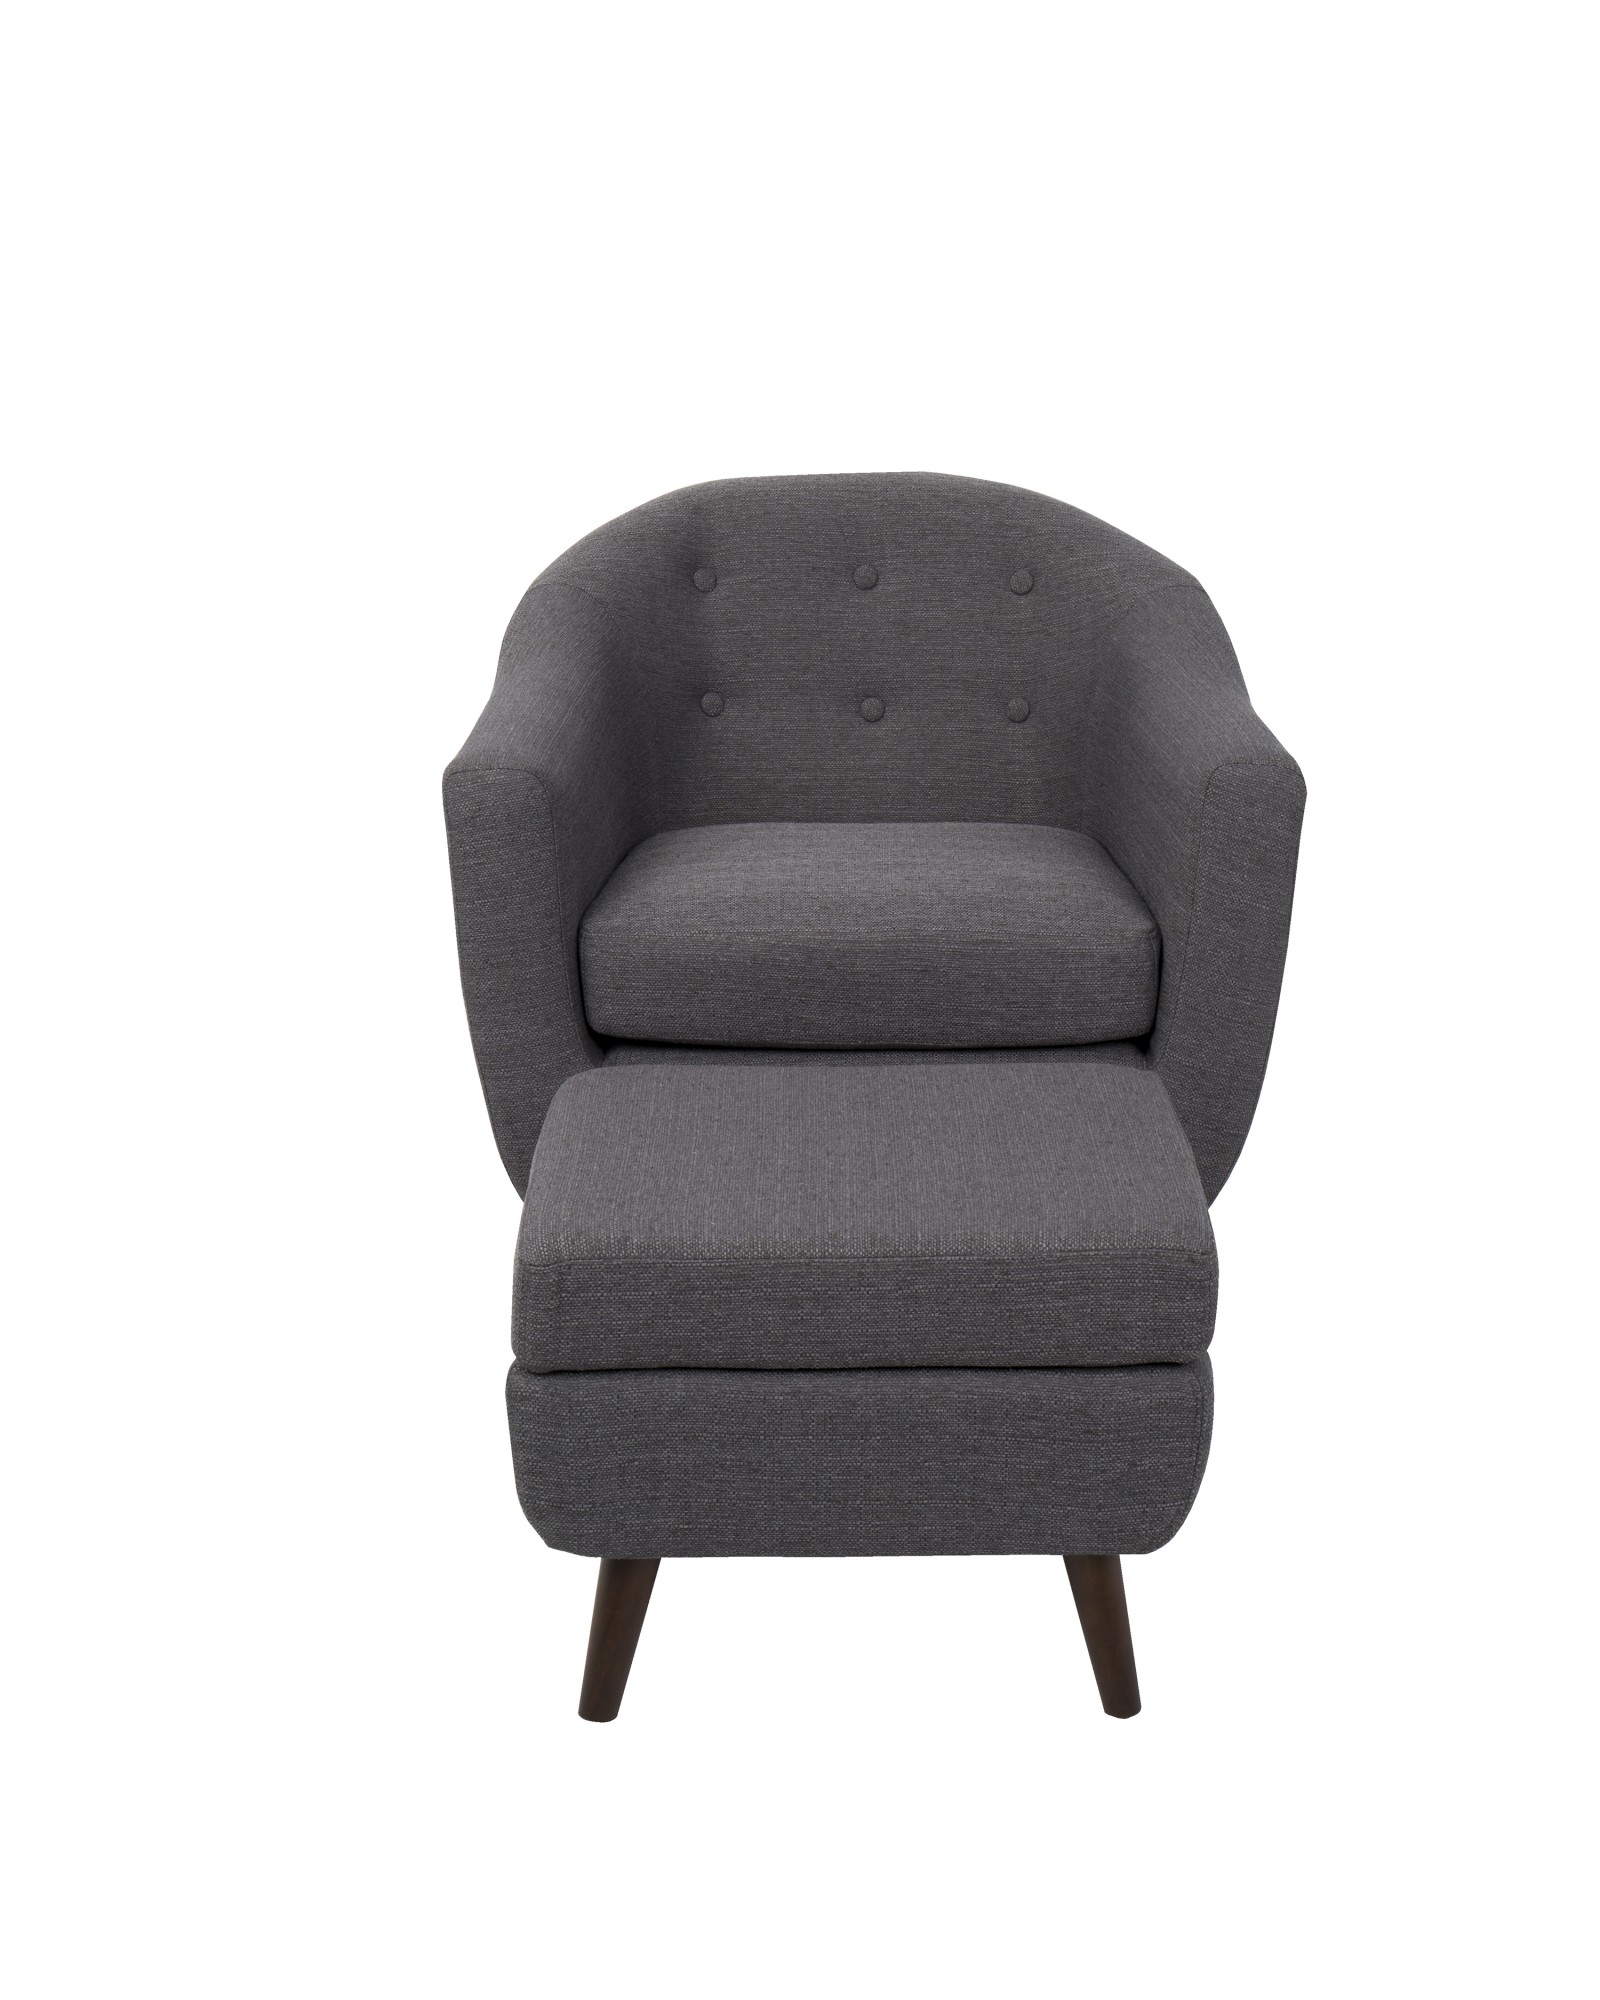 Rockwell Mid-Century Modern Accent Chair and Ottoman in Charcoal Grey